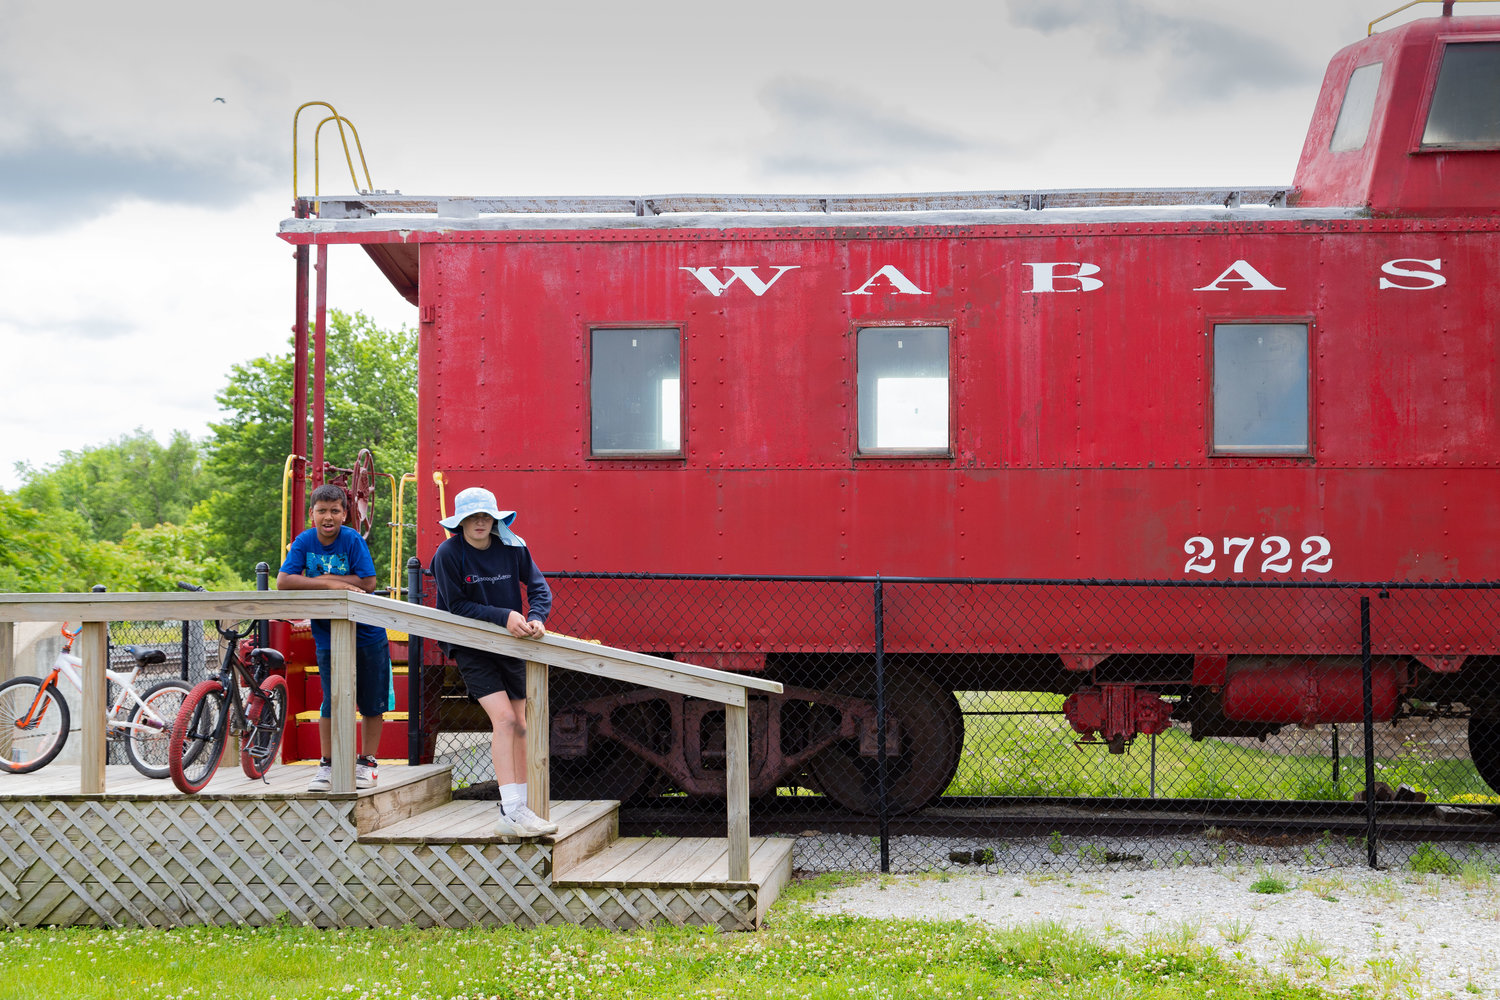 Jimmy Butler, of Kansas City, and Bartholomew James King pose by the Wasbash caboose in Depot Park in Moberly Wednesday. The cousins rode their bikes on the streets that, next week, will be filled with vendors, entertainers and a carnival during Moberly Rotary Club’s annual Railroad Days festival in Depot Park.